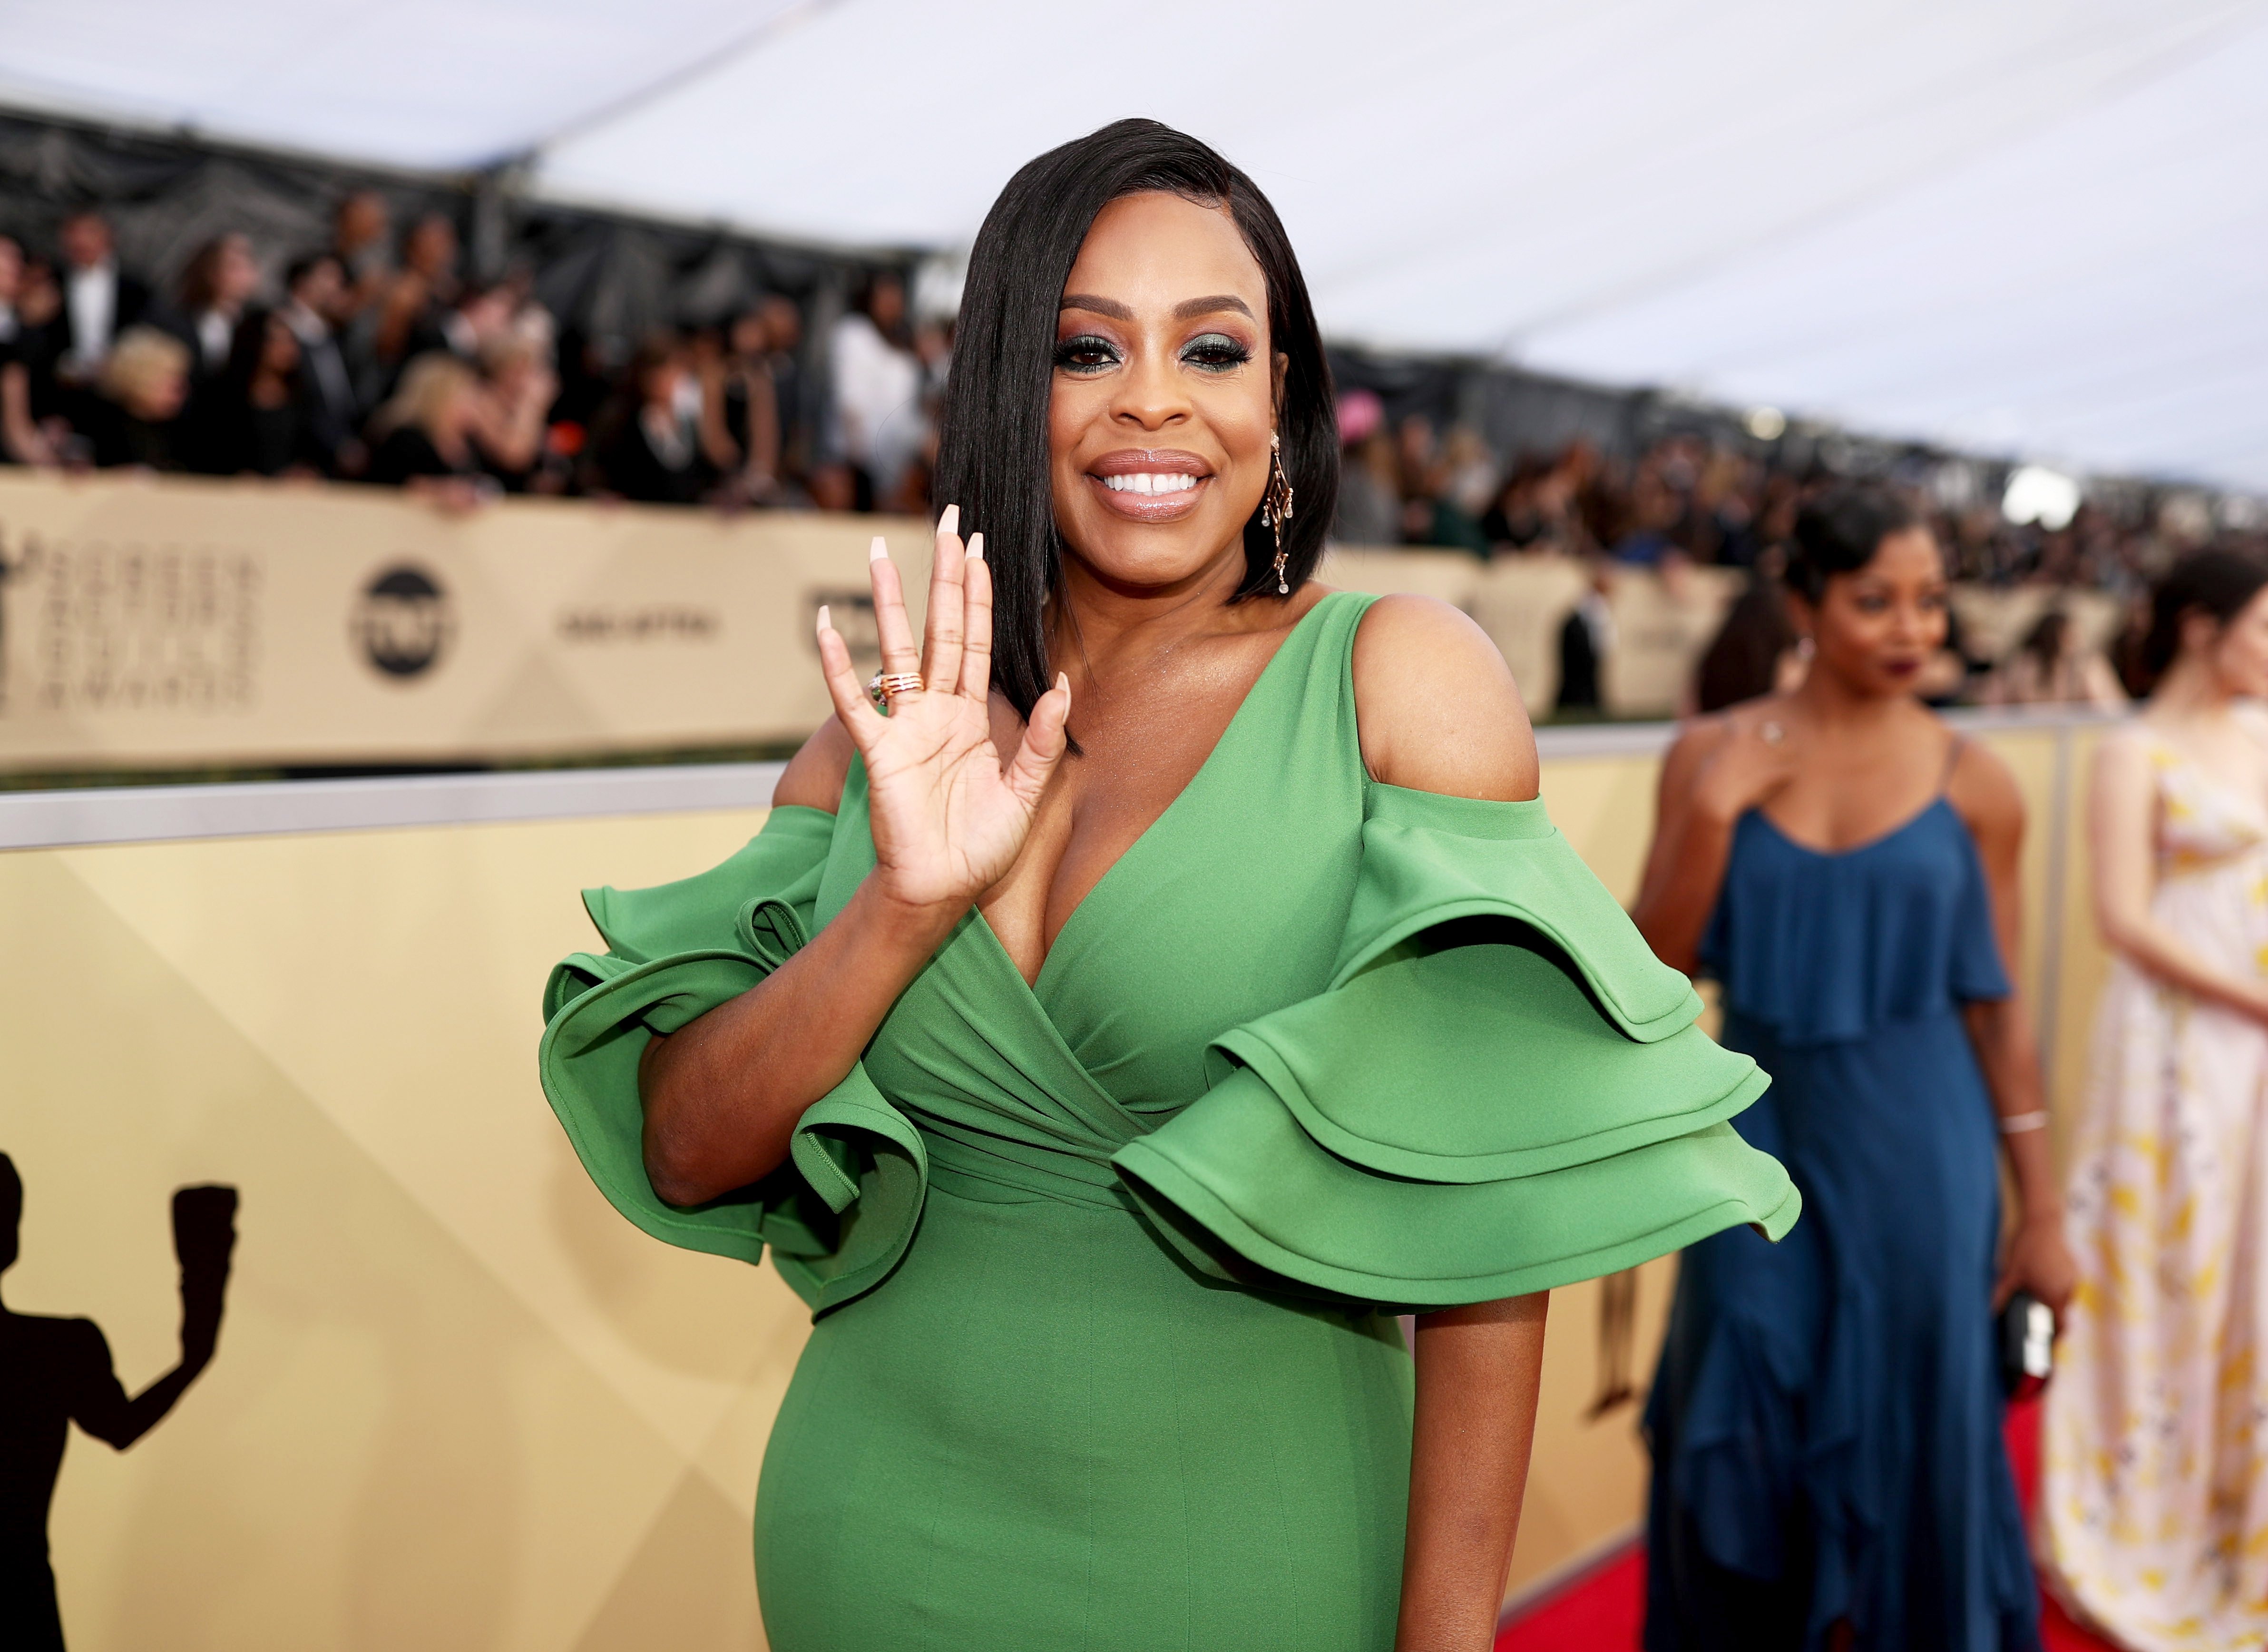 Niecy Nash at the 24th Annual Screen Actors Guild Awards at The Shrine Auditorium in Los Angeles, California on January 21, 2018. | Photo: Getty Images